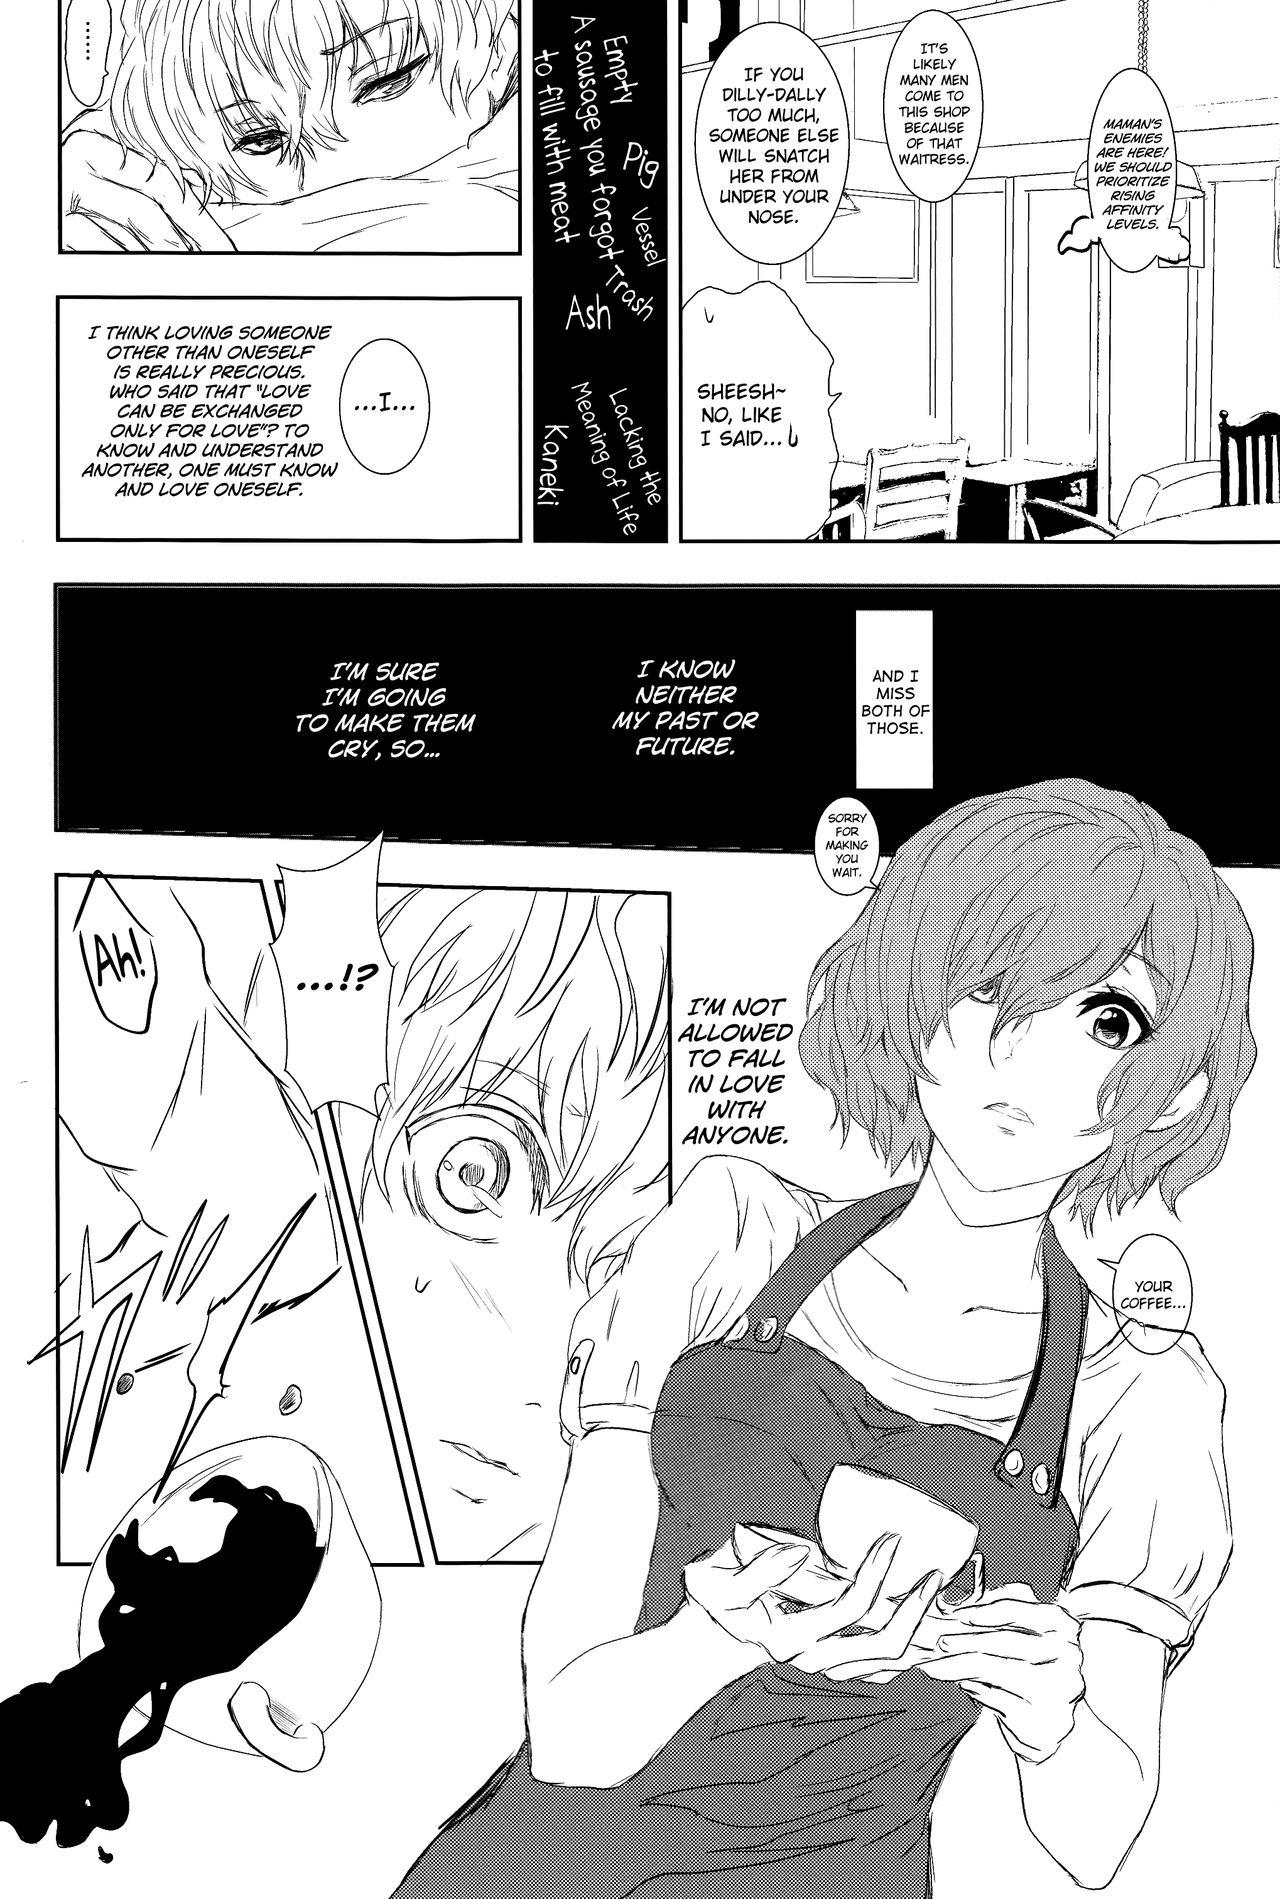 Gaystraight Innocent Blue - Before Sunrise - Tokyo ghoul Chibola - Page 8